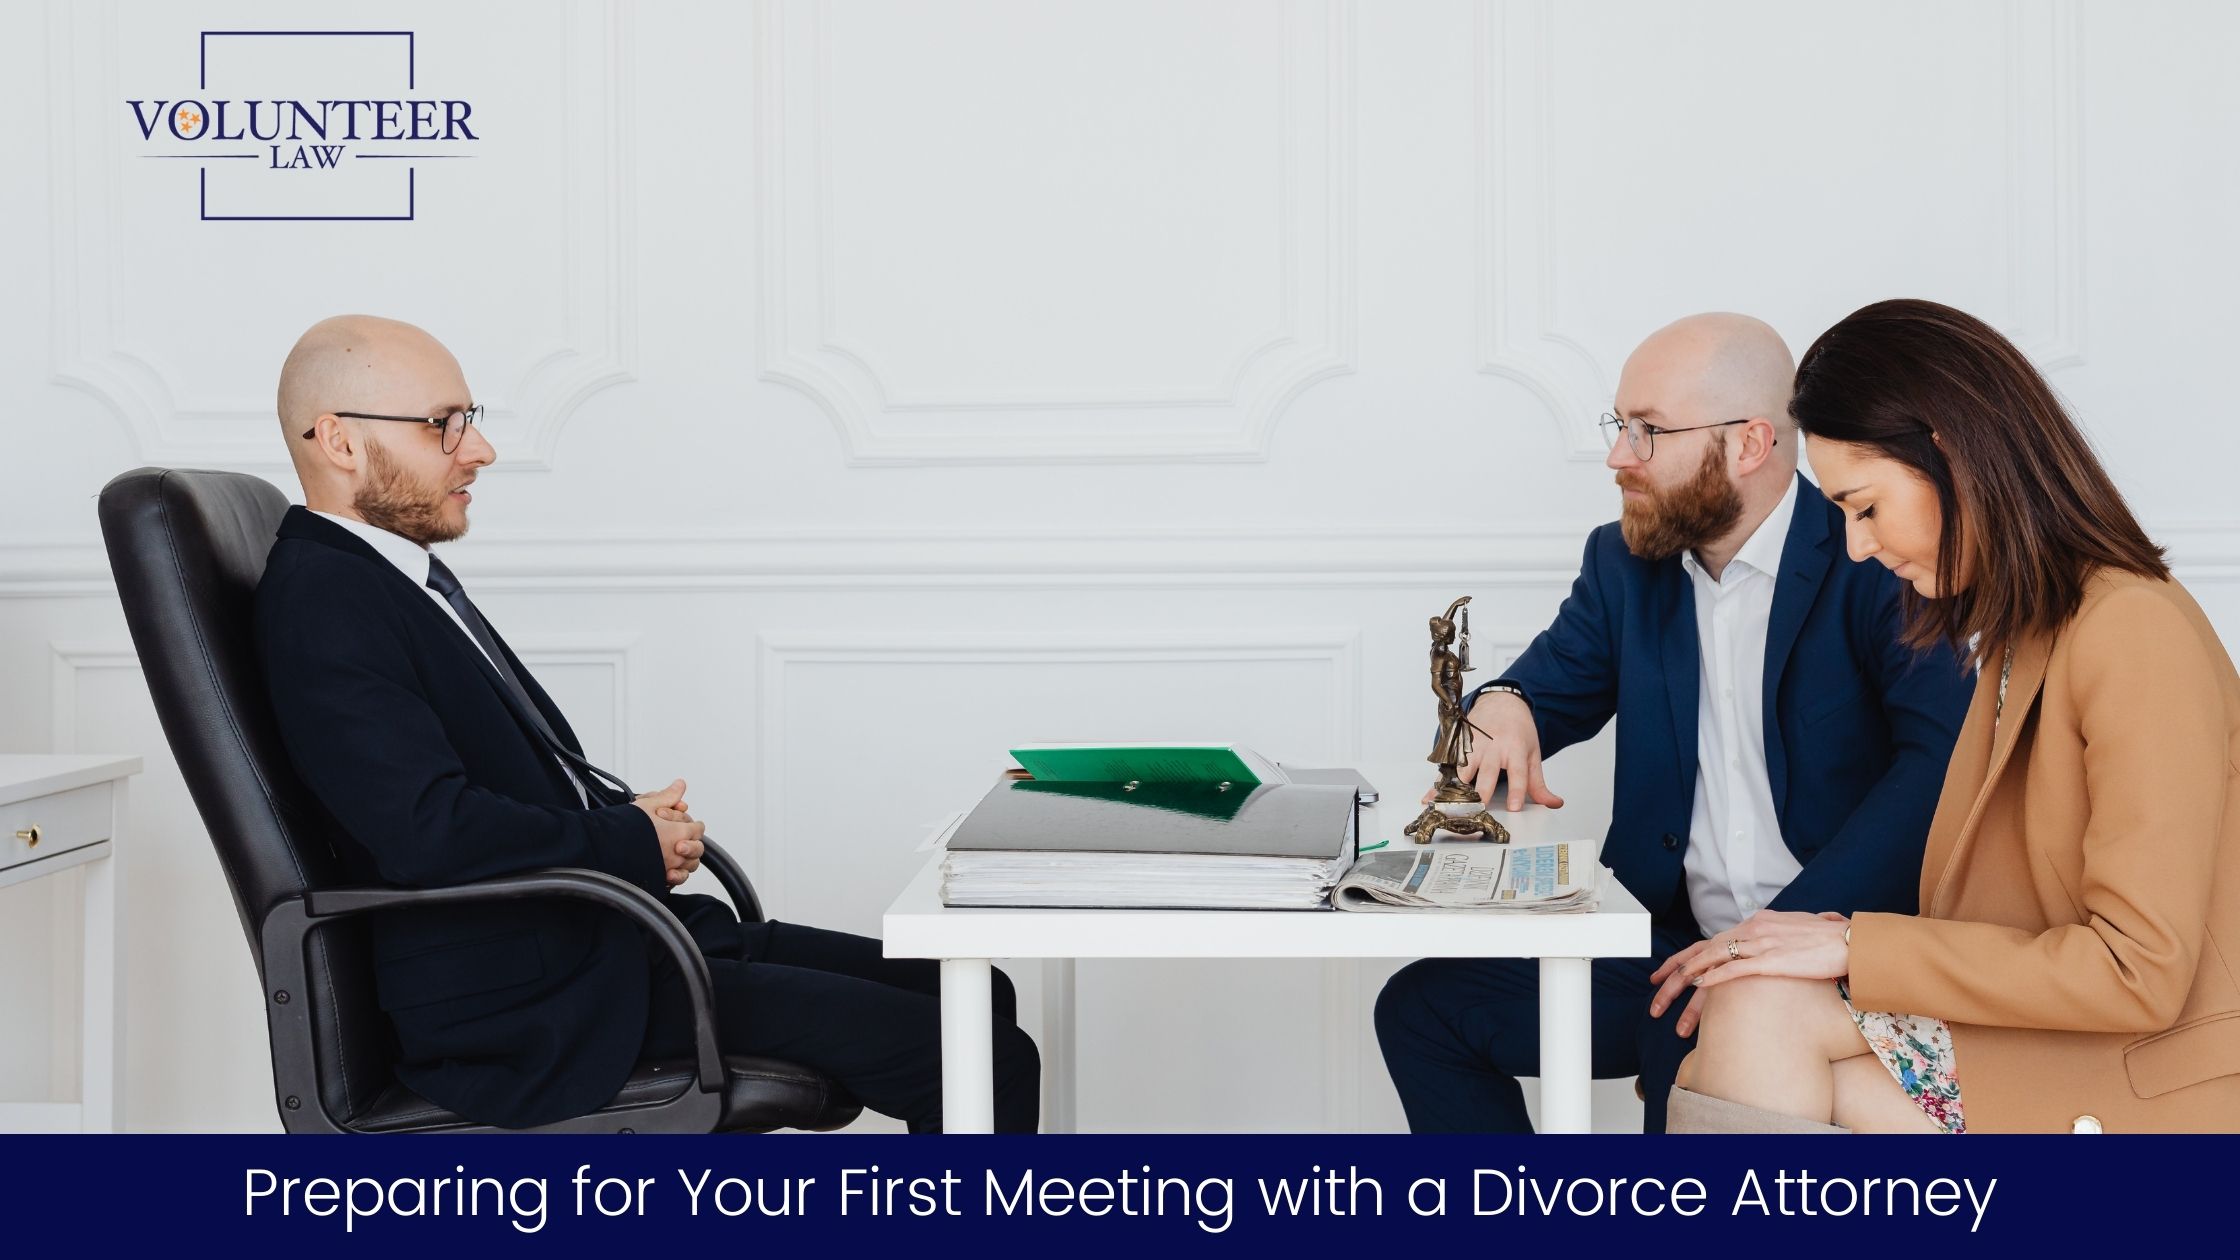 Preparing for Your First Meeting with a Divorce Attorney